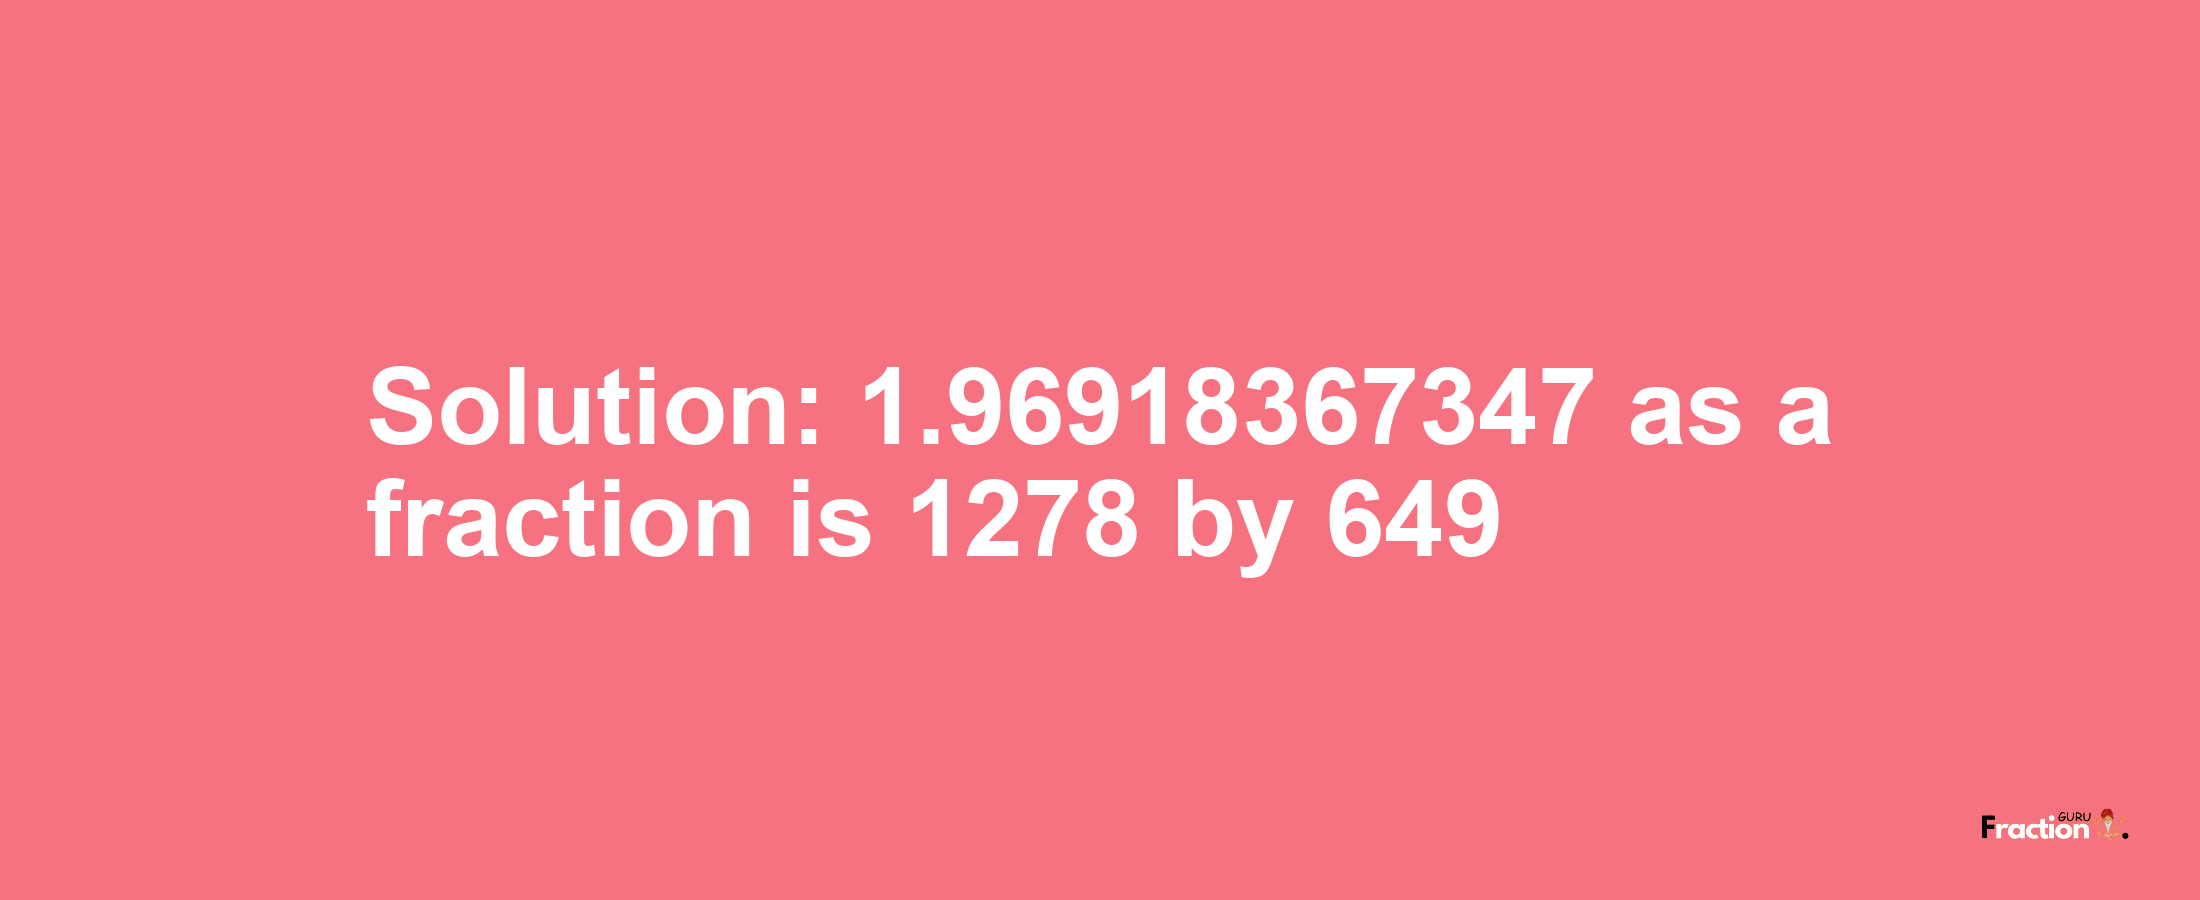 Solution:1.96918367347 as a fraction is 1278/649